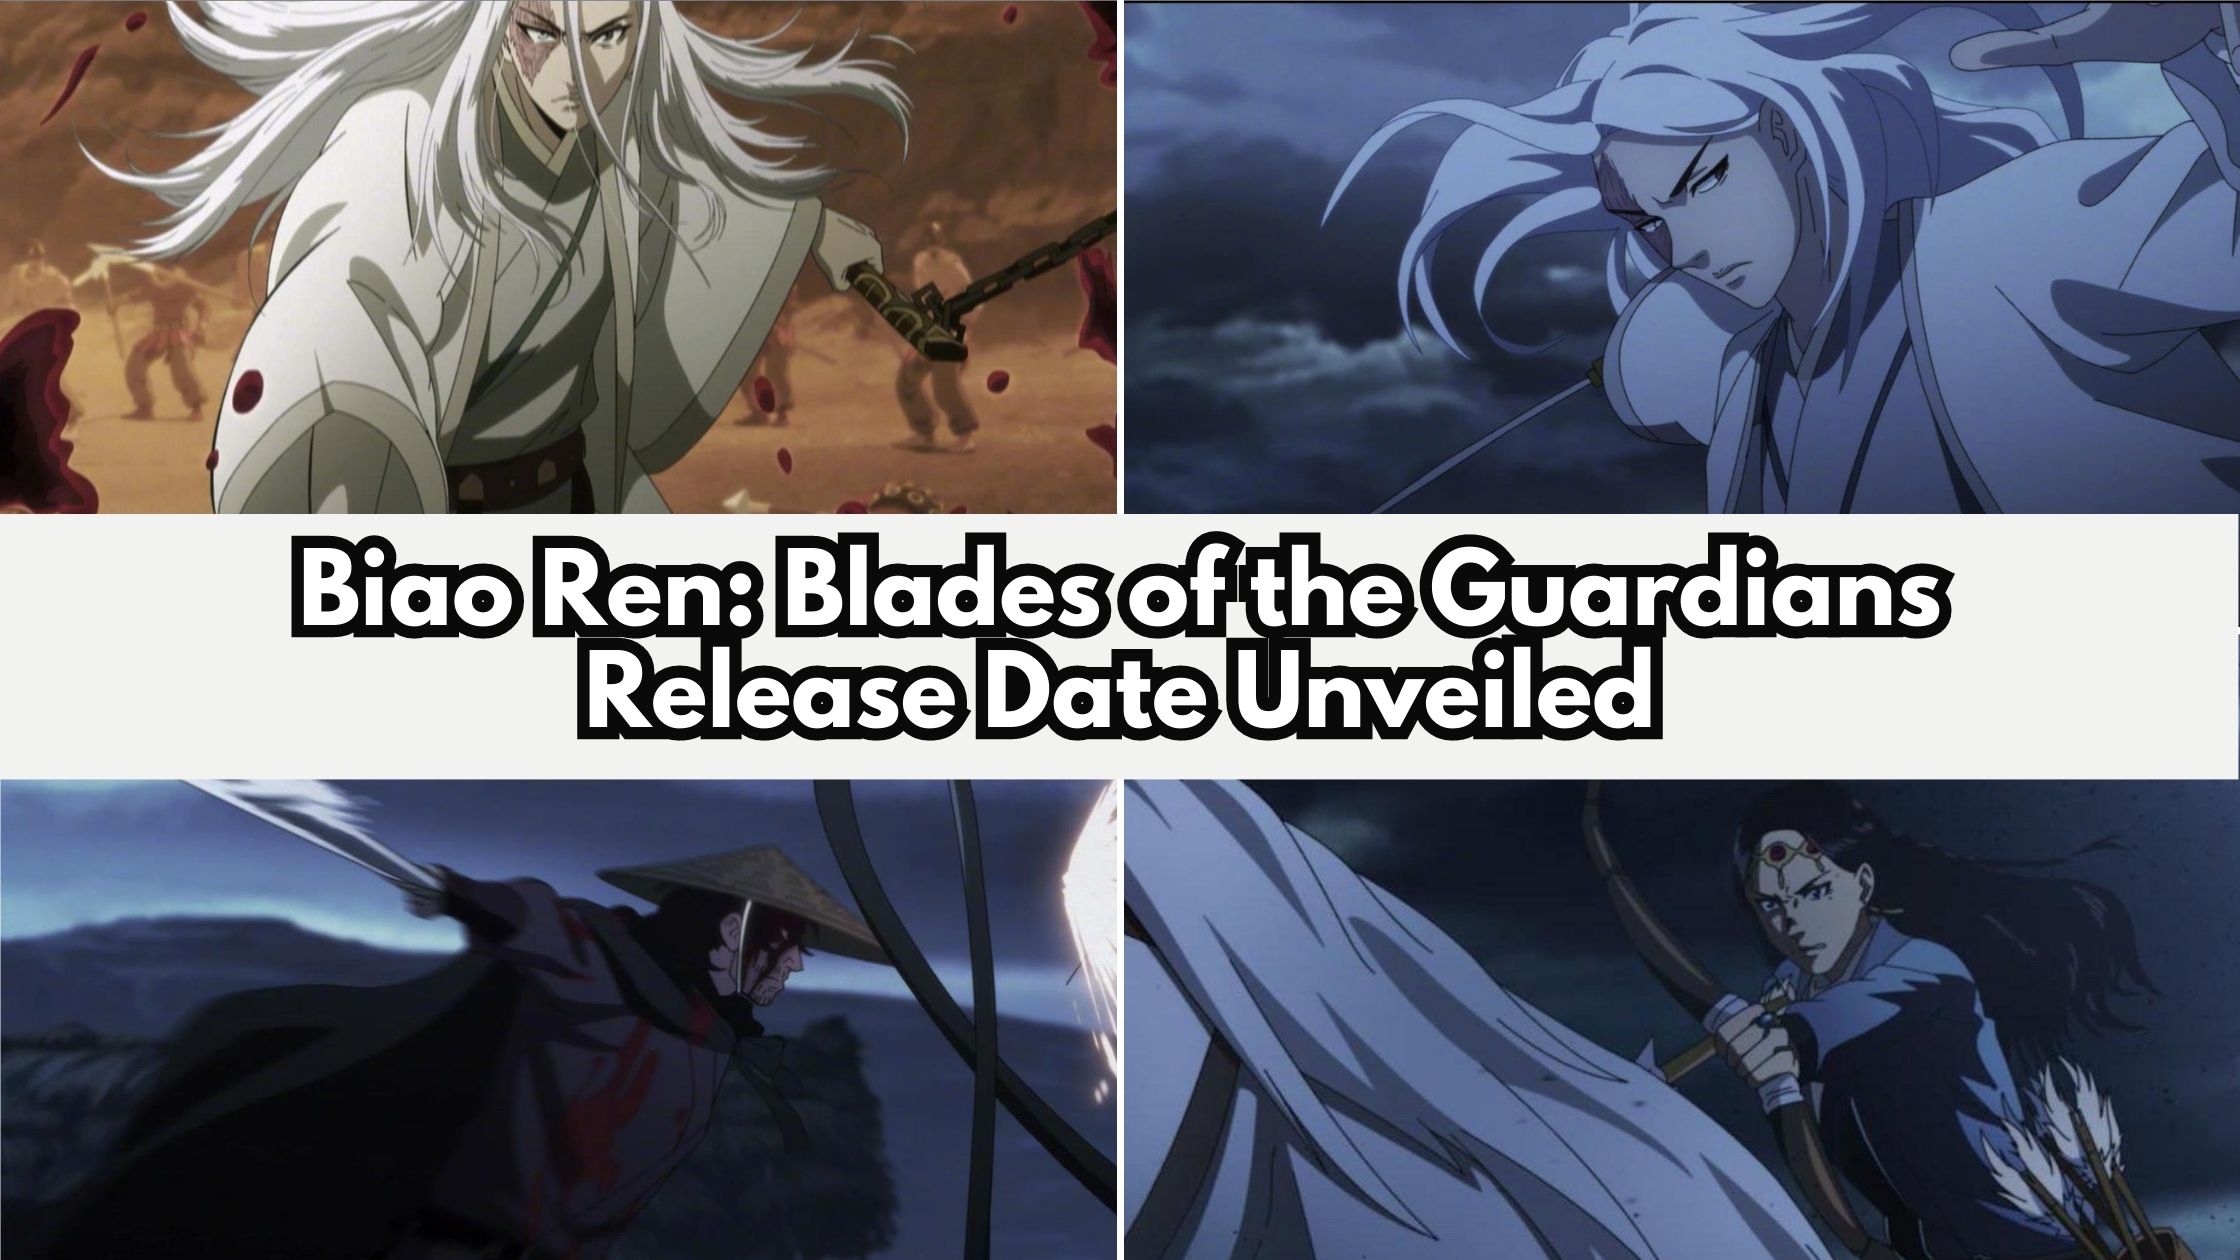 Watch Biao Ren: Blades of the Guardians 